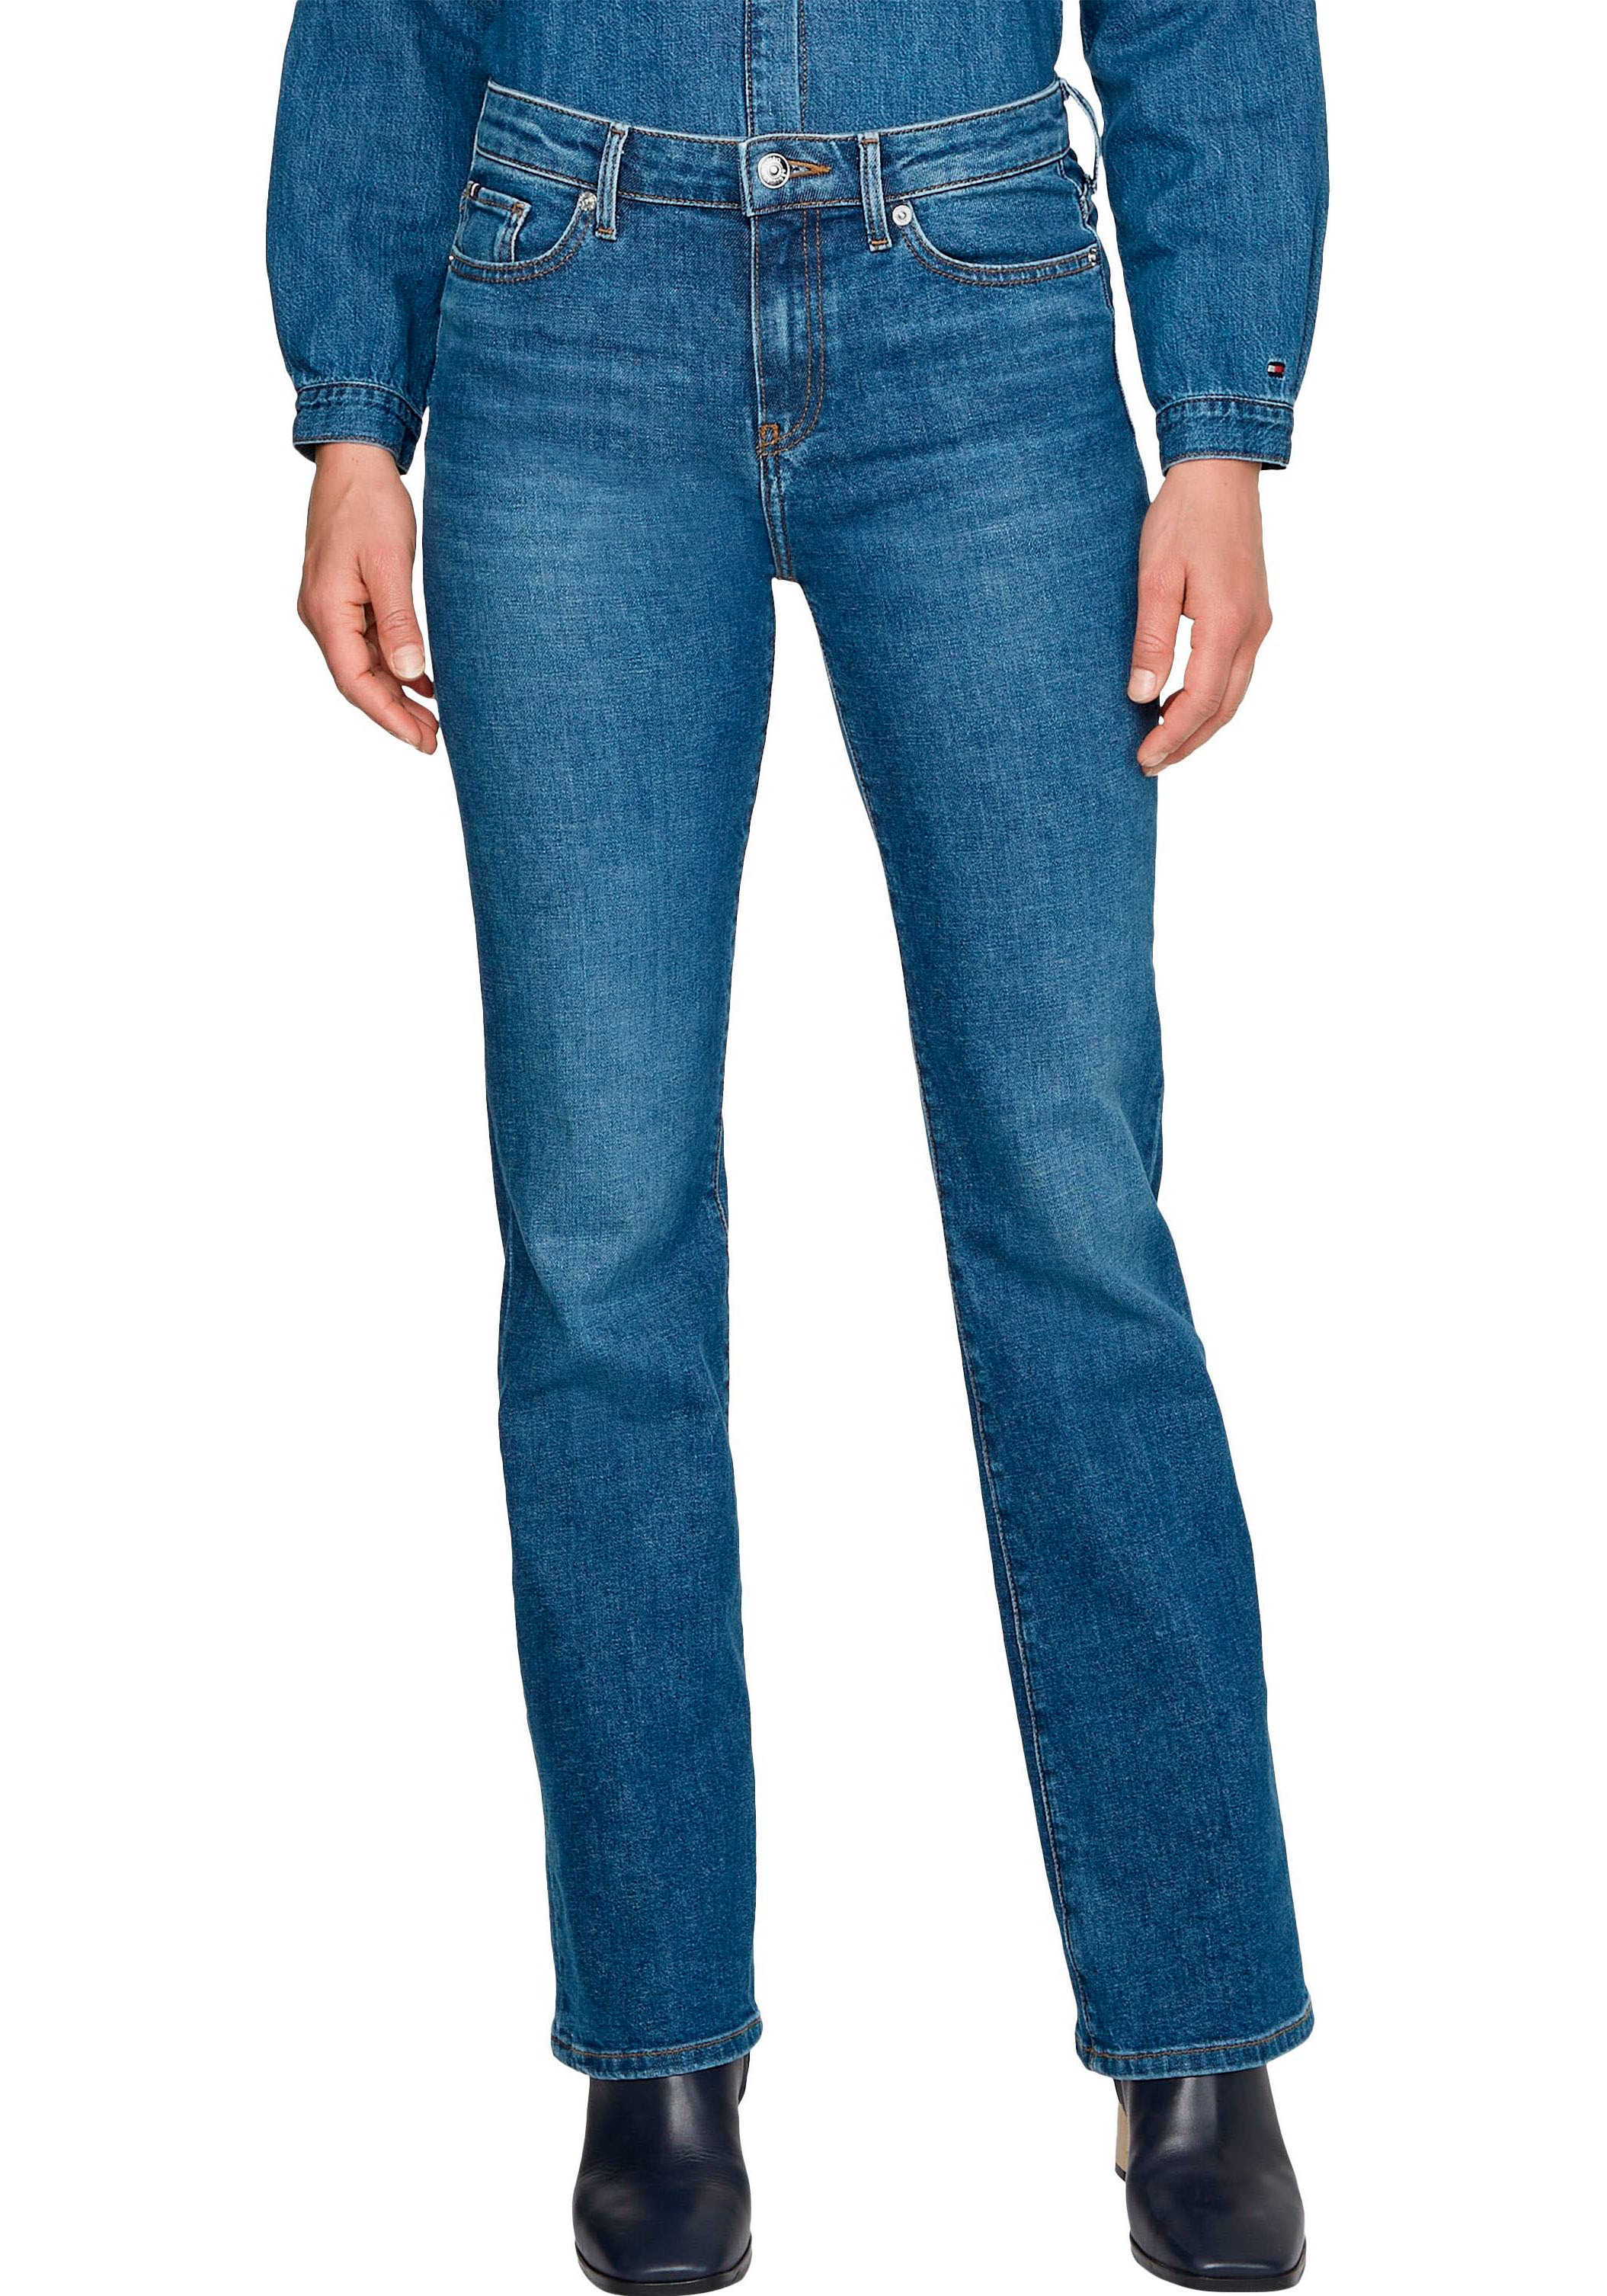 Tommy Hilfiger RW mit »BOOTCUT Badge bei Hilfiger Tommy online PATY«, Logo- Bootcut-Jeans